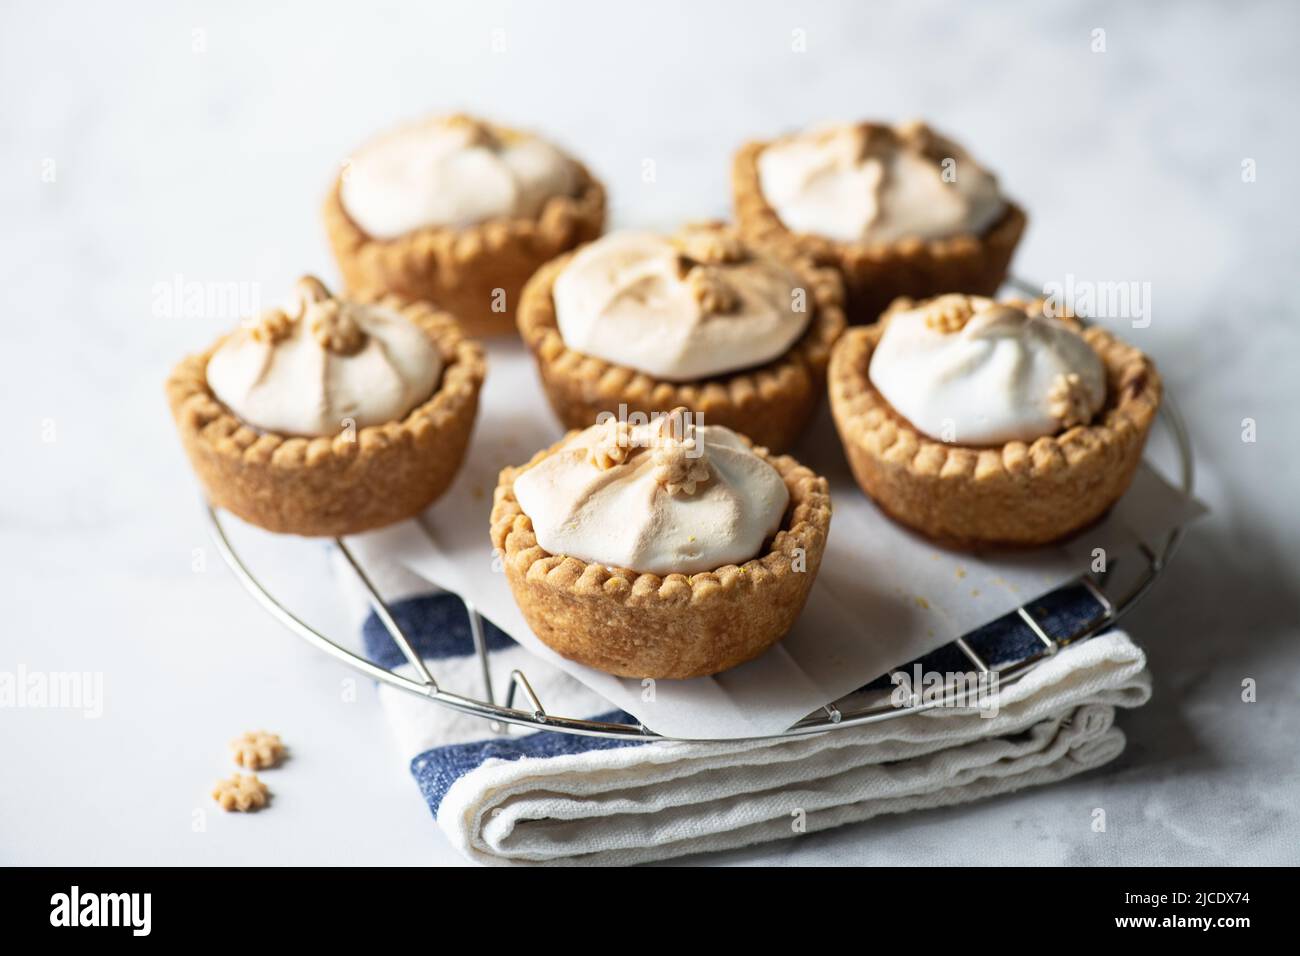 Lemon curd tartlets with whipped meringue on a wire rack on a gray background. Stock Photo